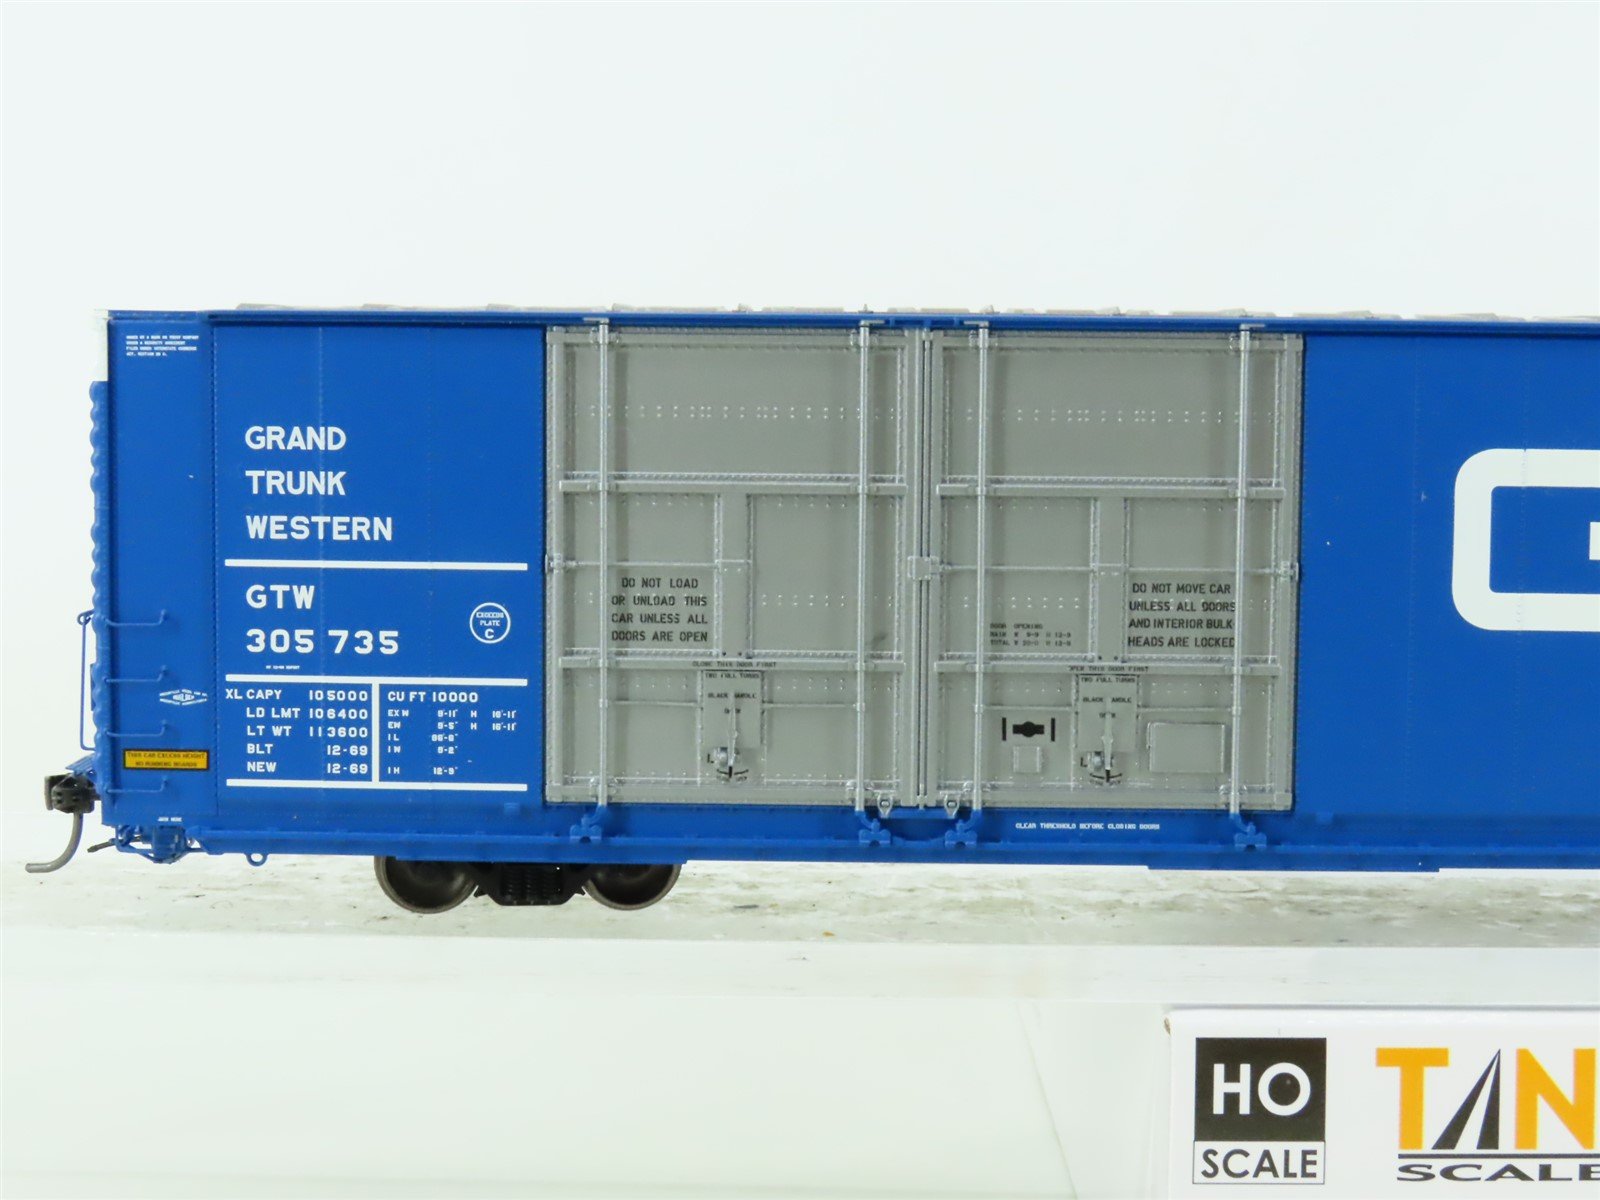 HO Scale Tangent #25518-01 GTW Grand Trunk Western 86' High Cube 